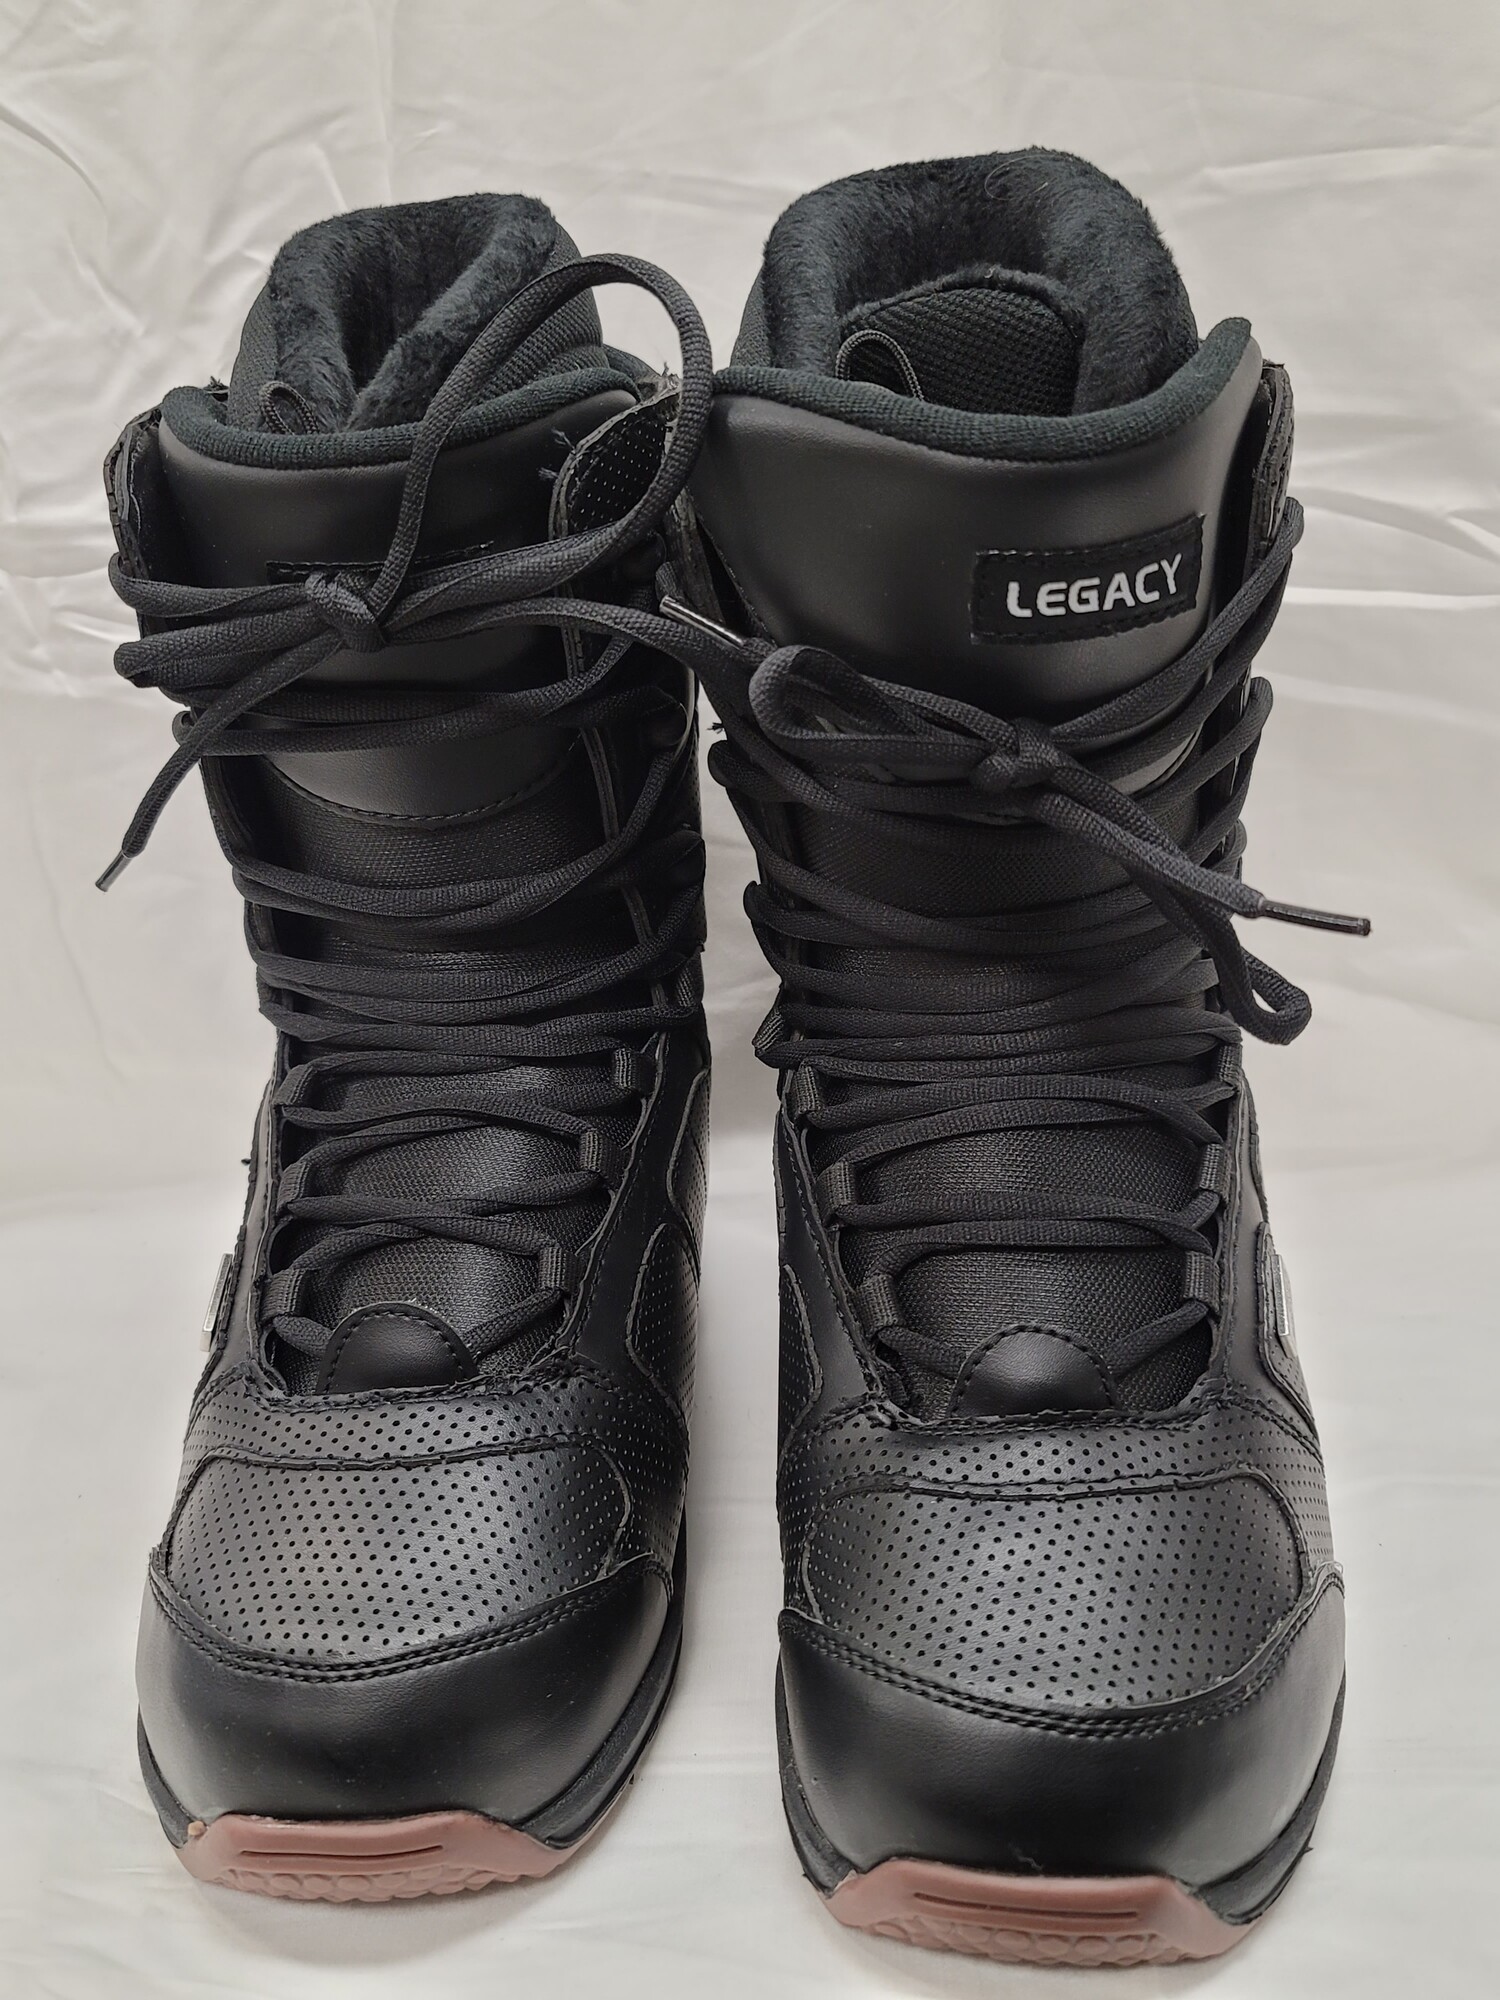 New FiveForty Legacy snowboard boots, Mens Size 12